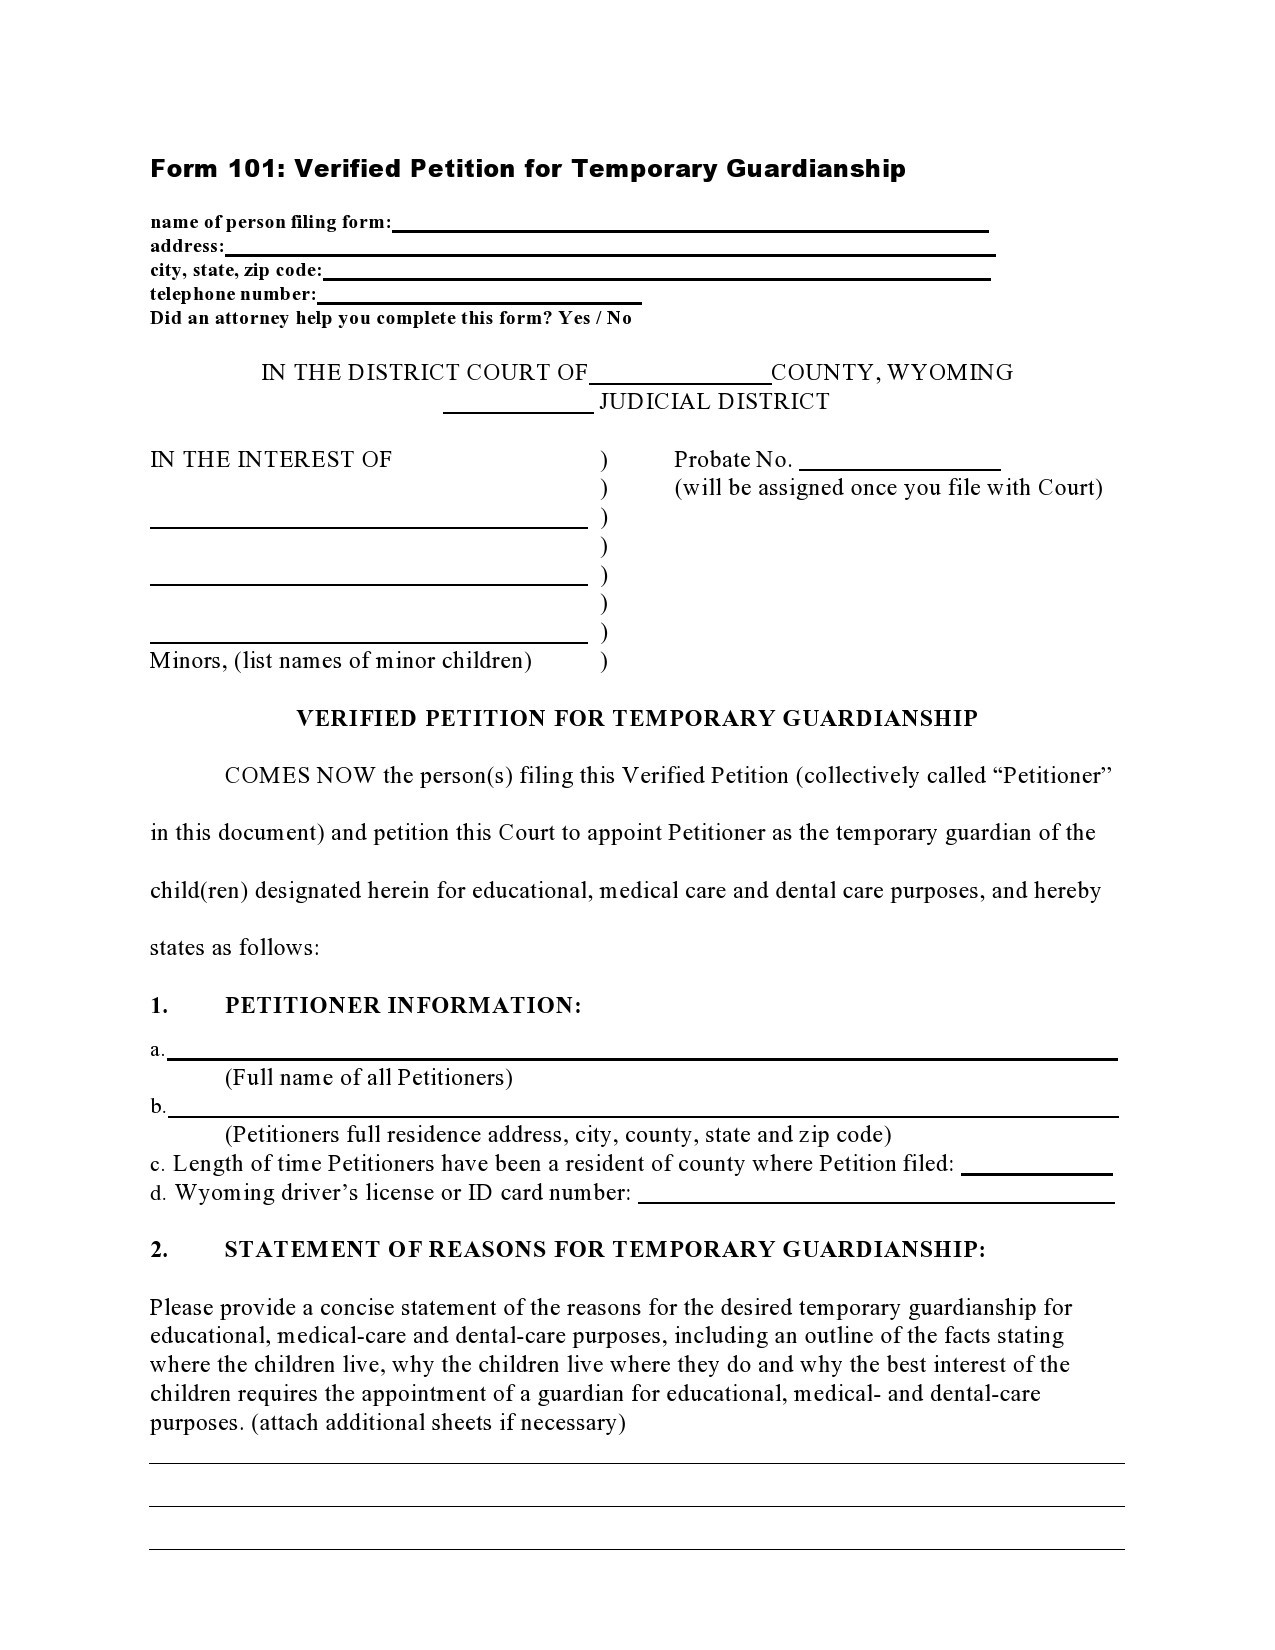 40 Printable Temporary Guardianship Forms All States 8905